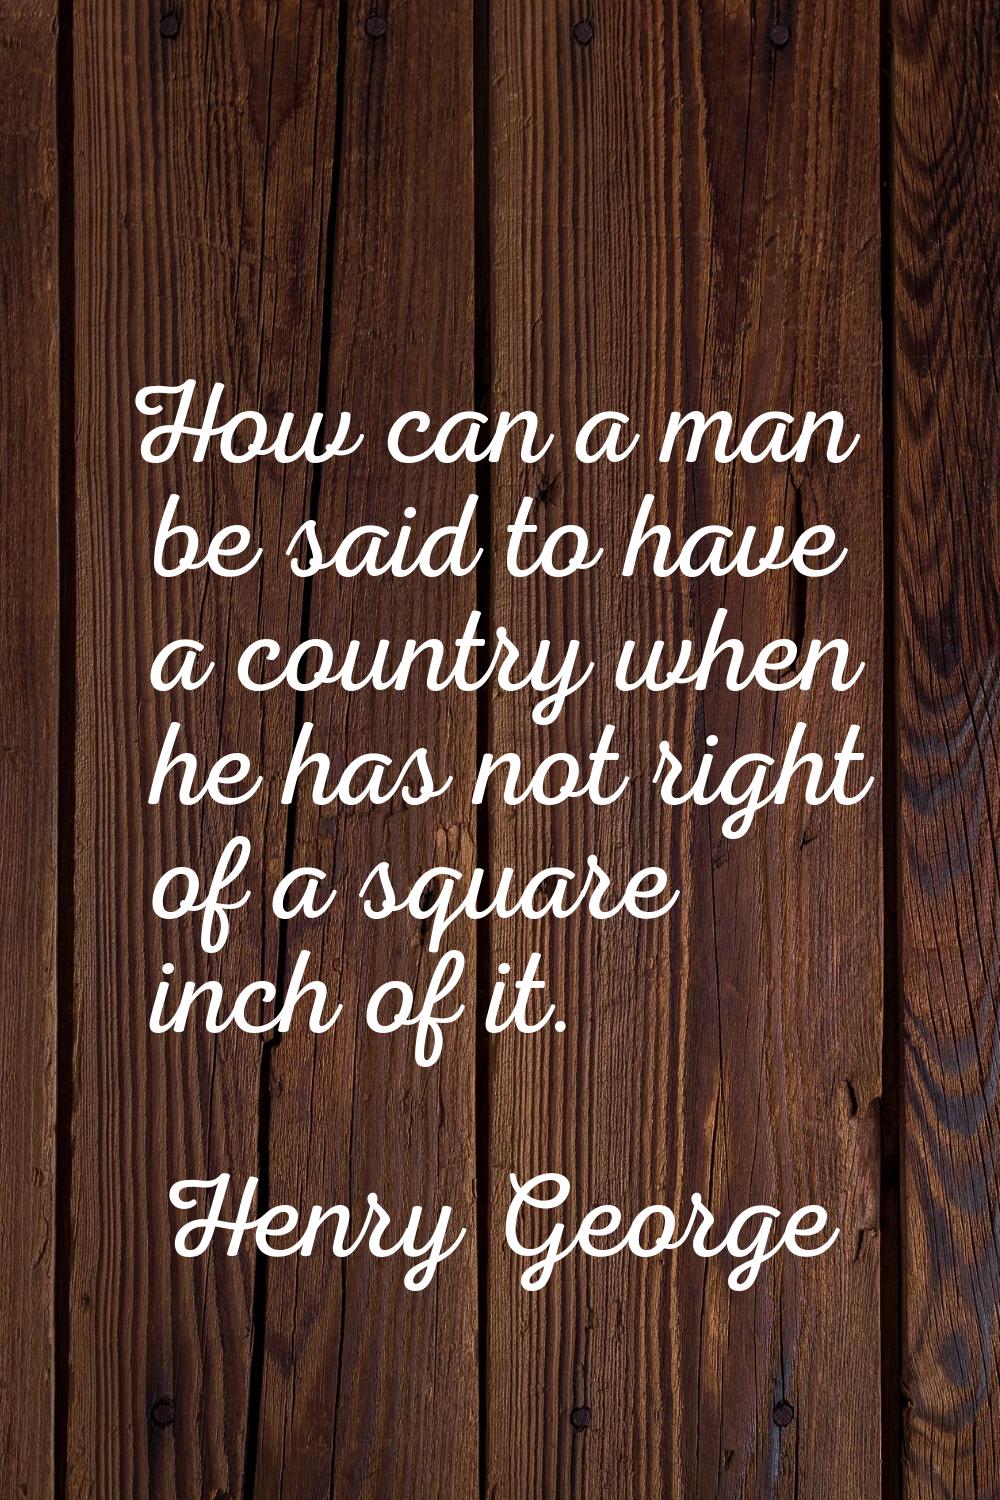 How can a man be said to have a country when he has not right of a square inch of it.